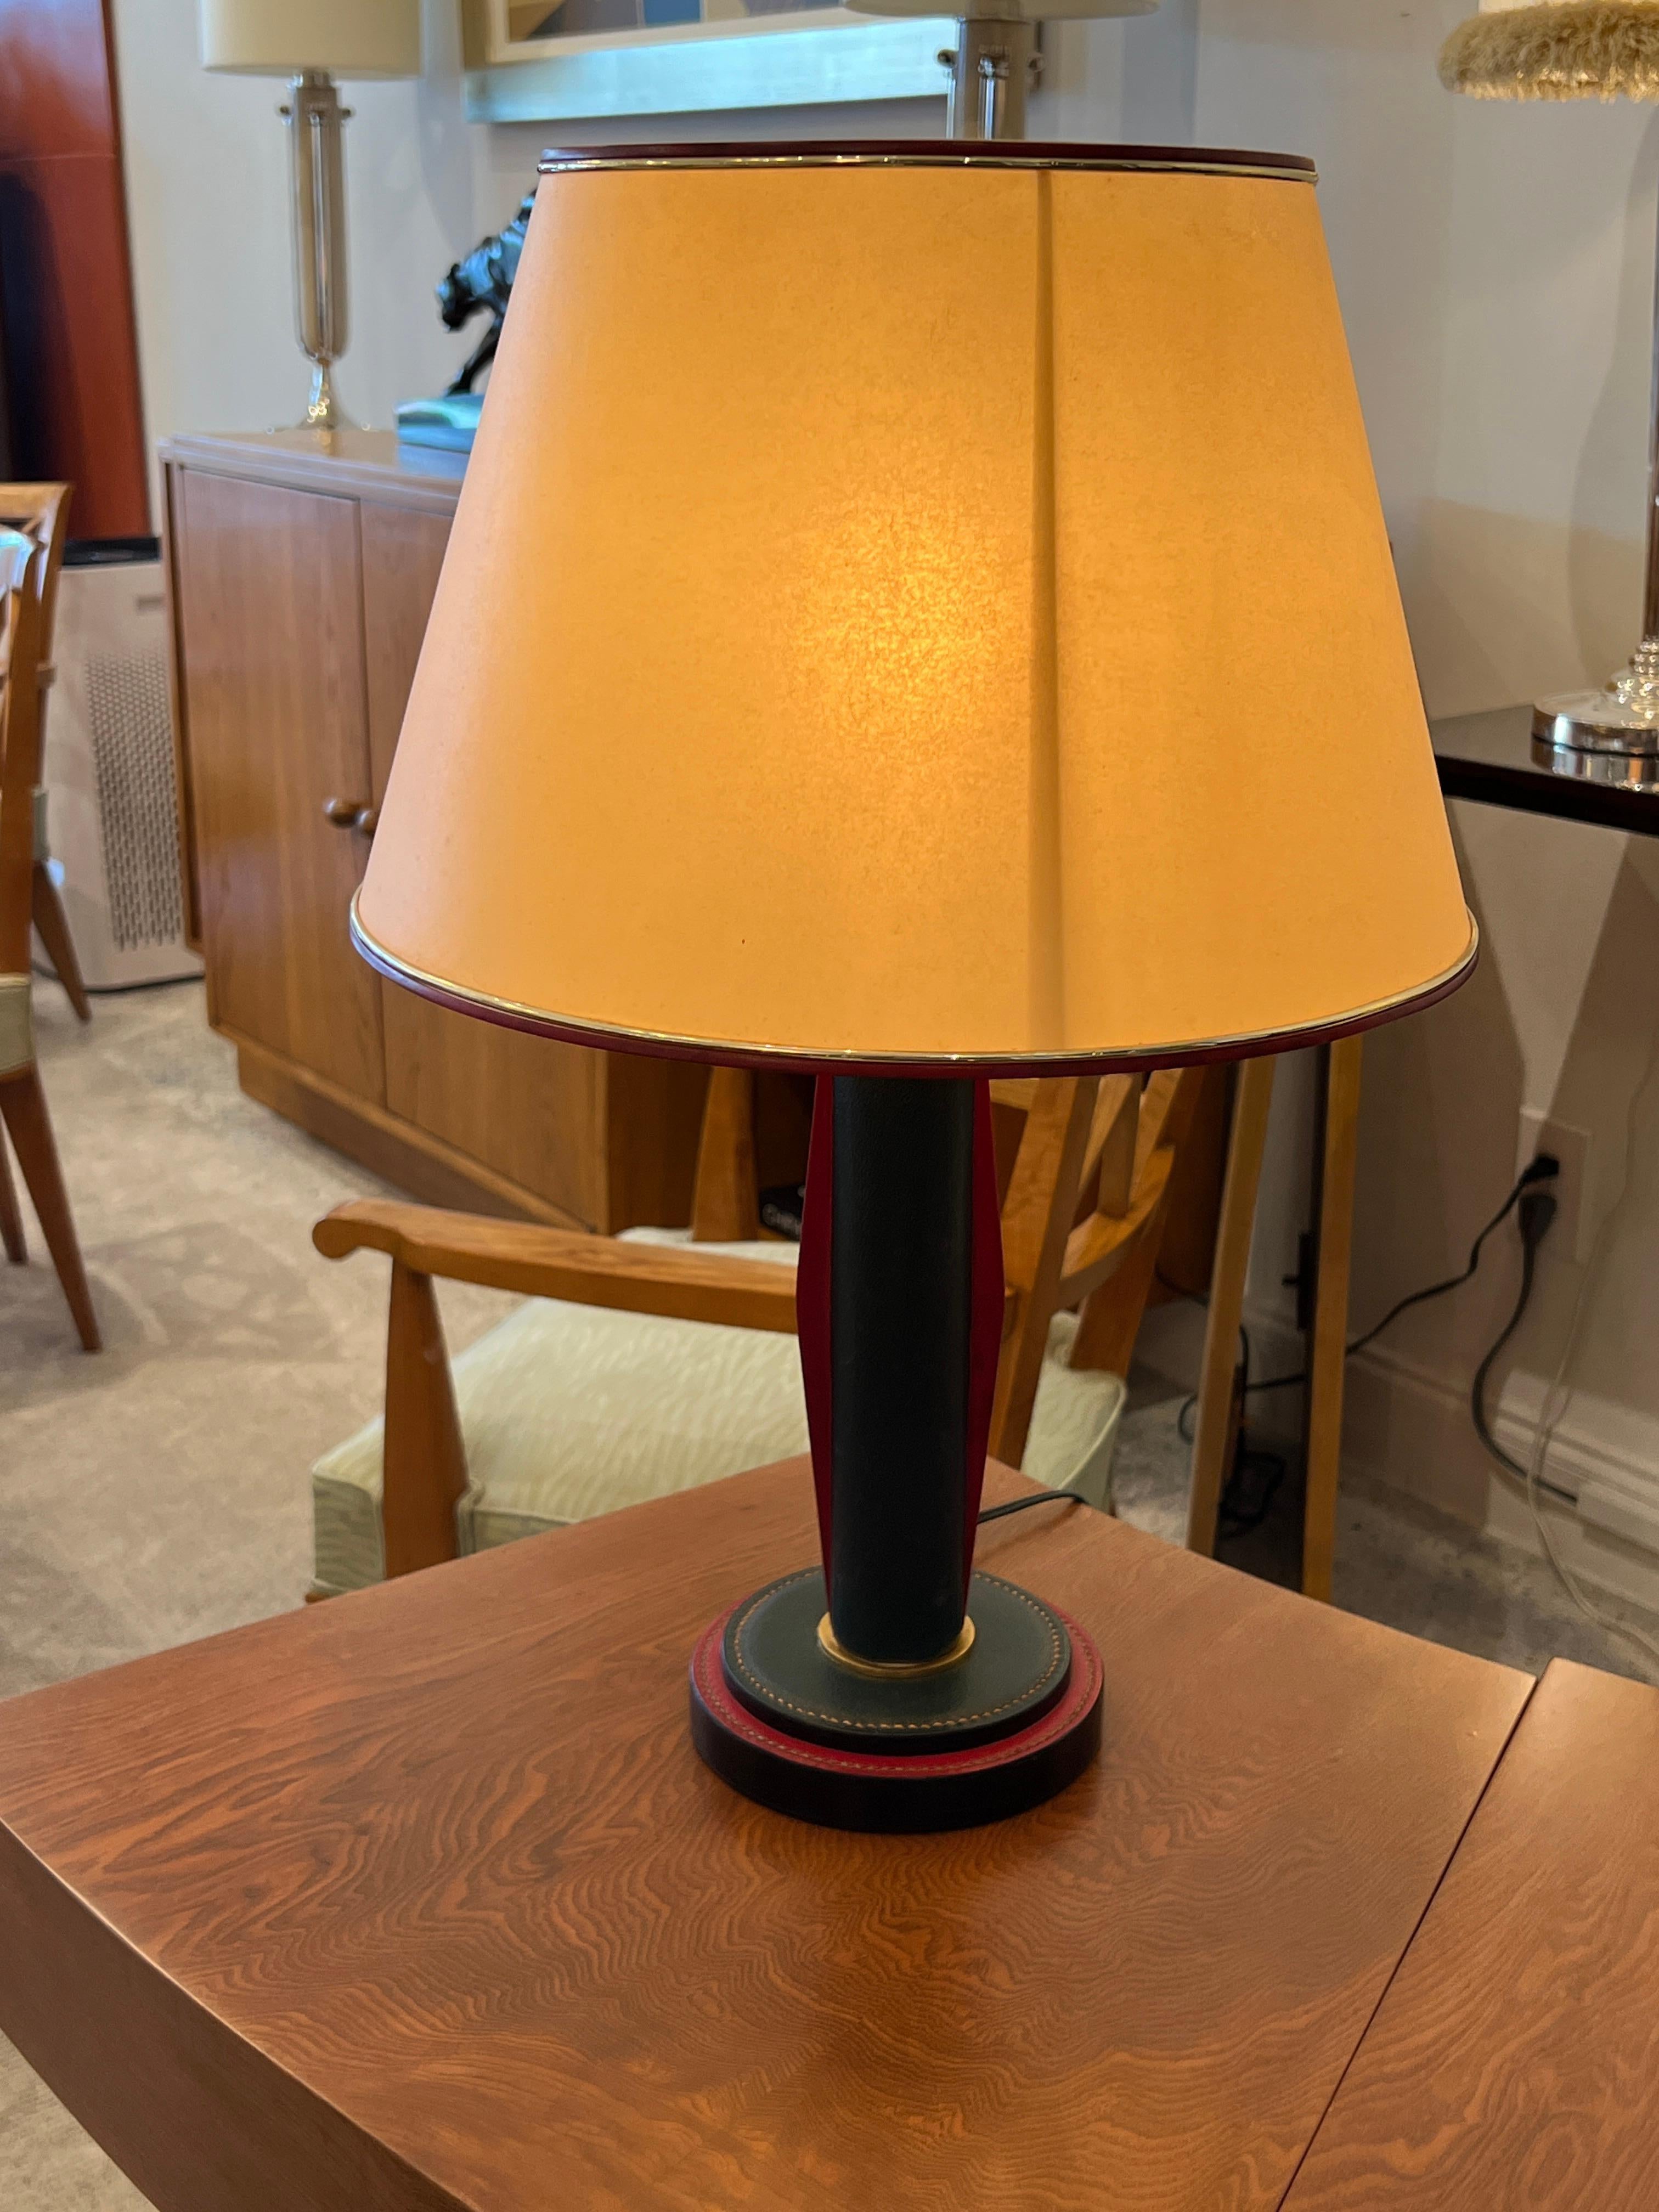 Art Deco vintage table lamp with a leather shaft in Hermés Forest Green with Hermés red leather details on the side of the shaft and base. This piece comes with a Papier lampshade.
